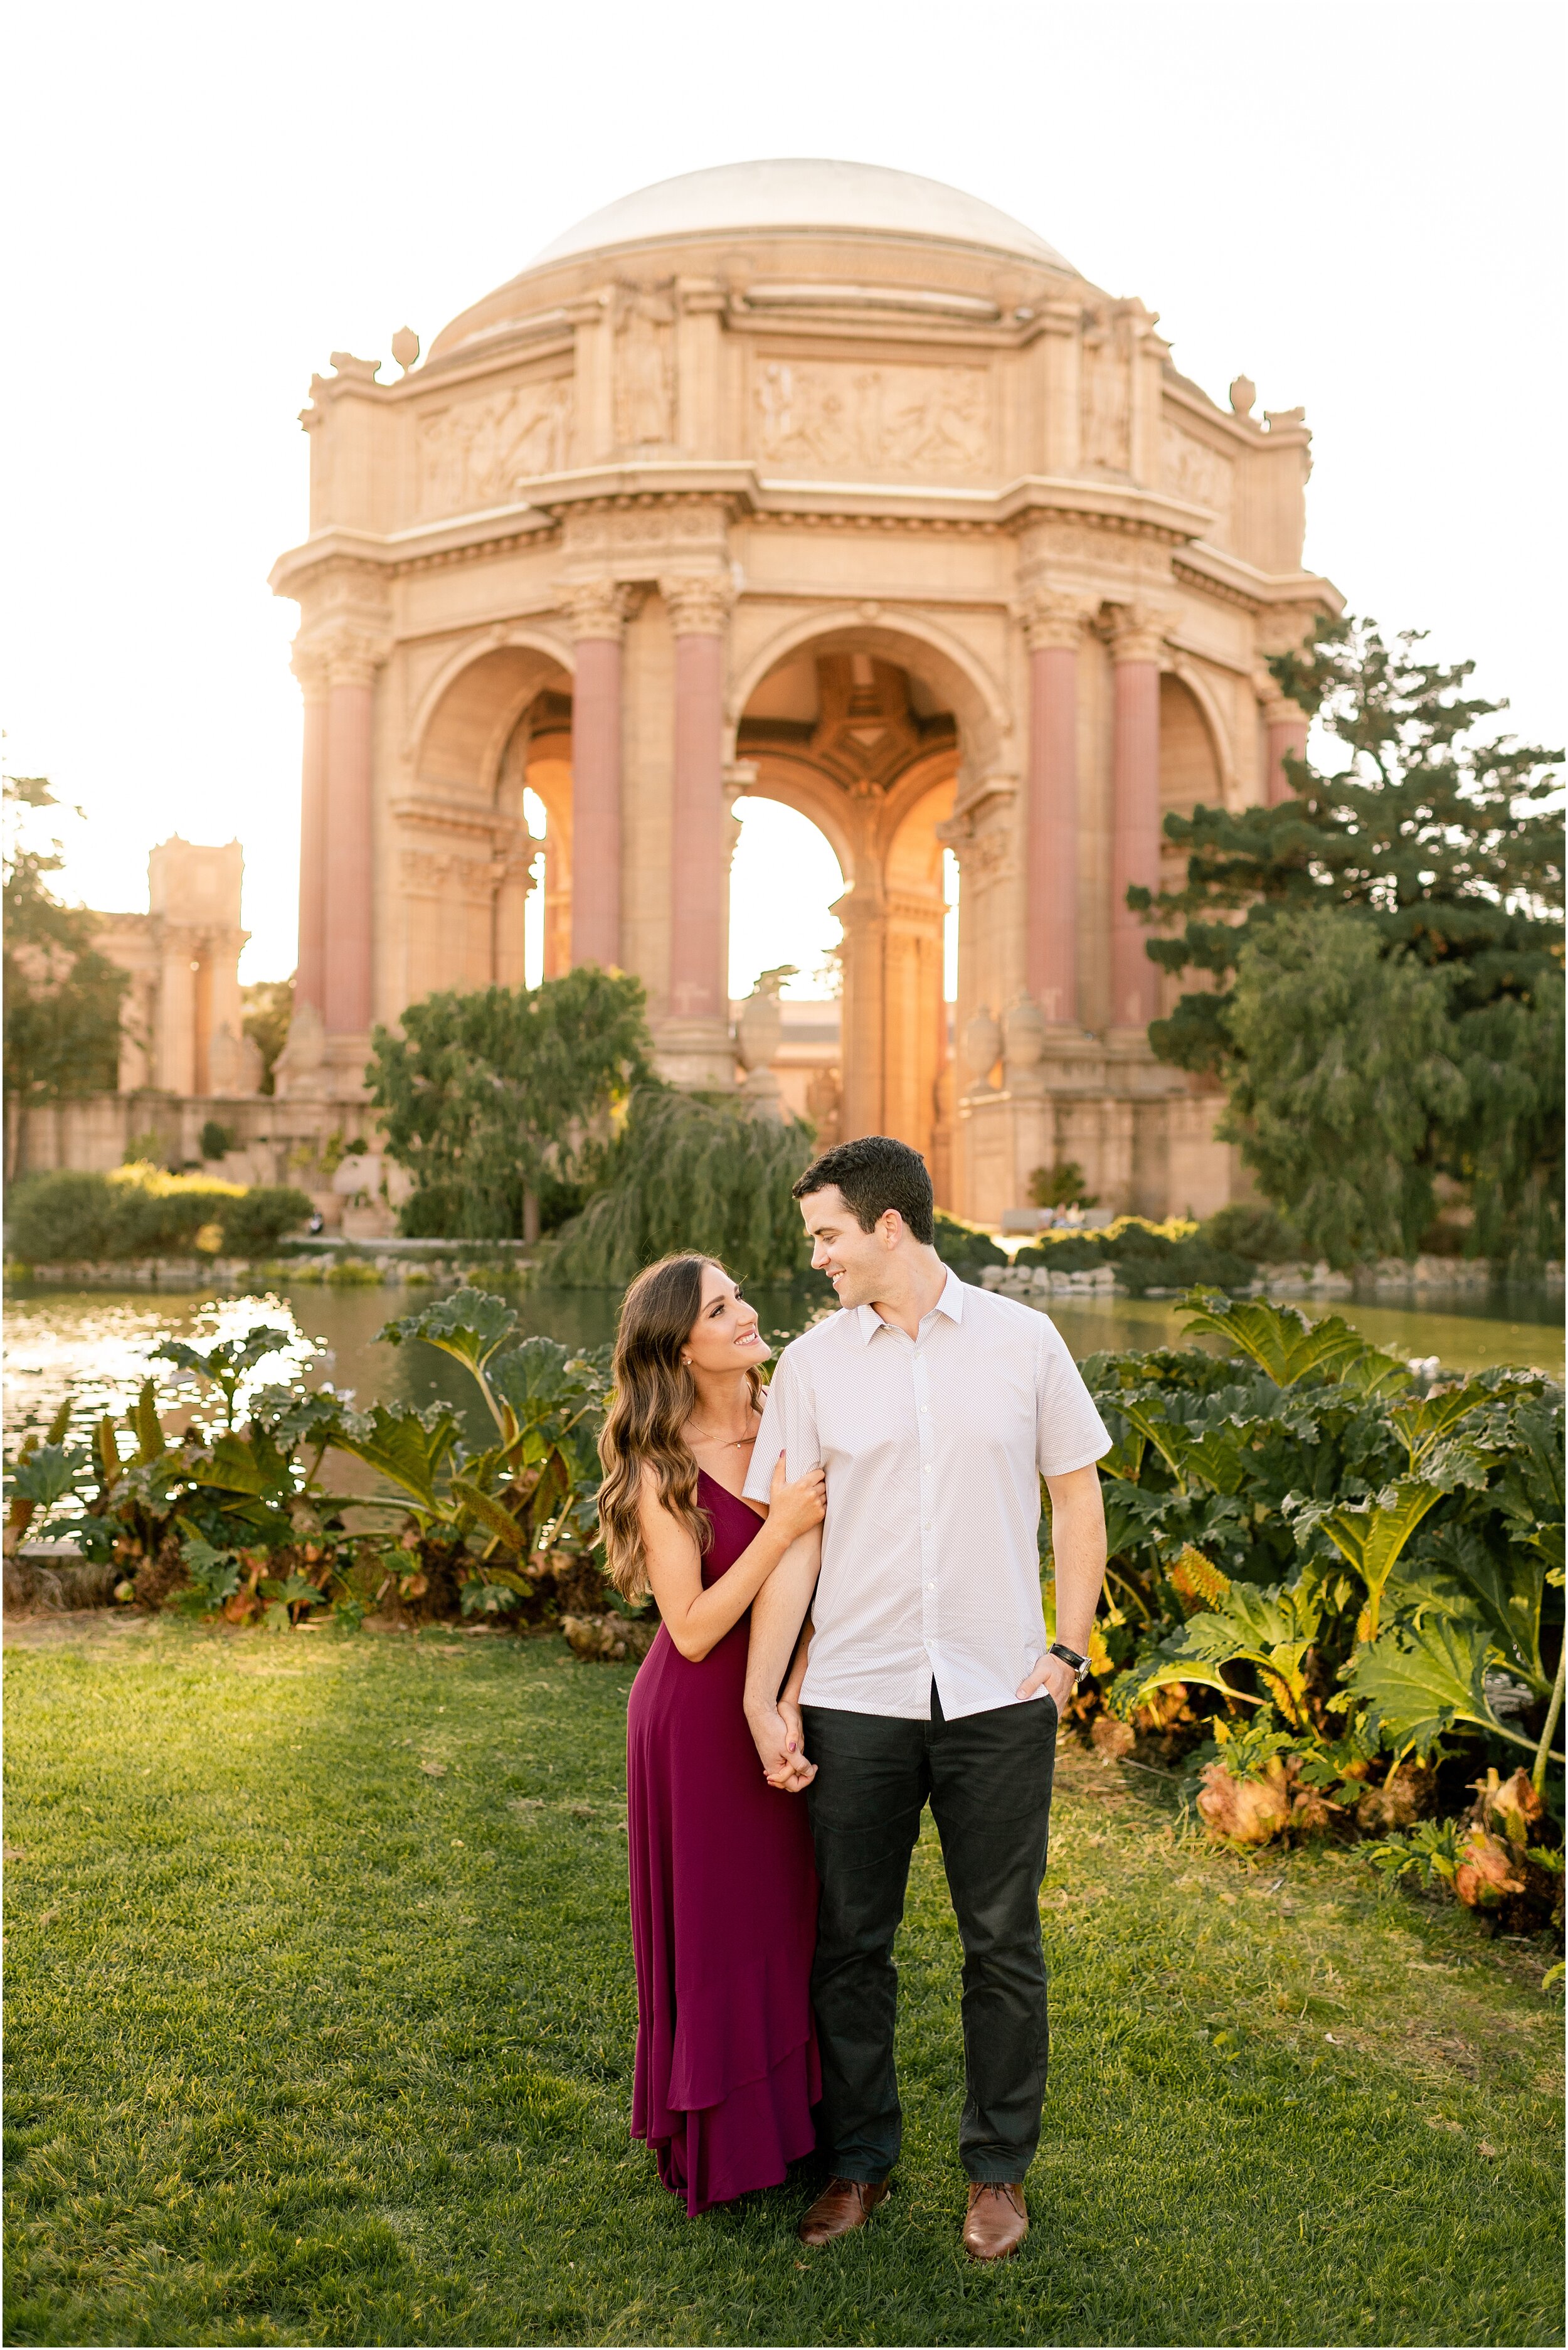 hannah leigh photography Baker Beach, Lovers Lane. Palace of Fine Arts Engagement Session San Franscico, CA_4840.jpg